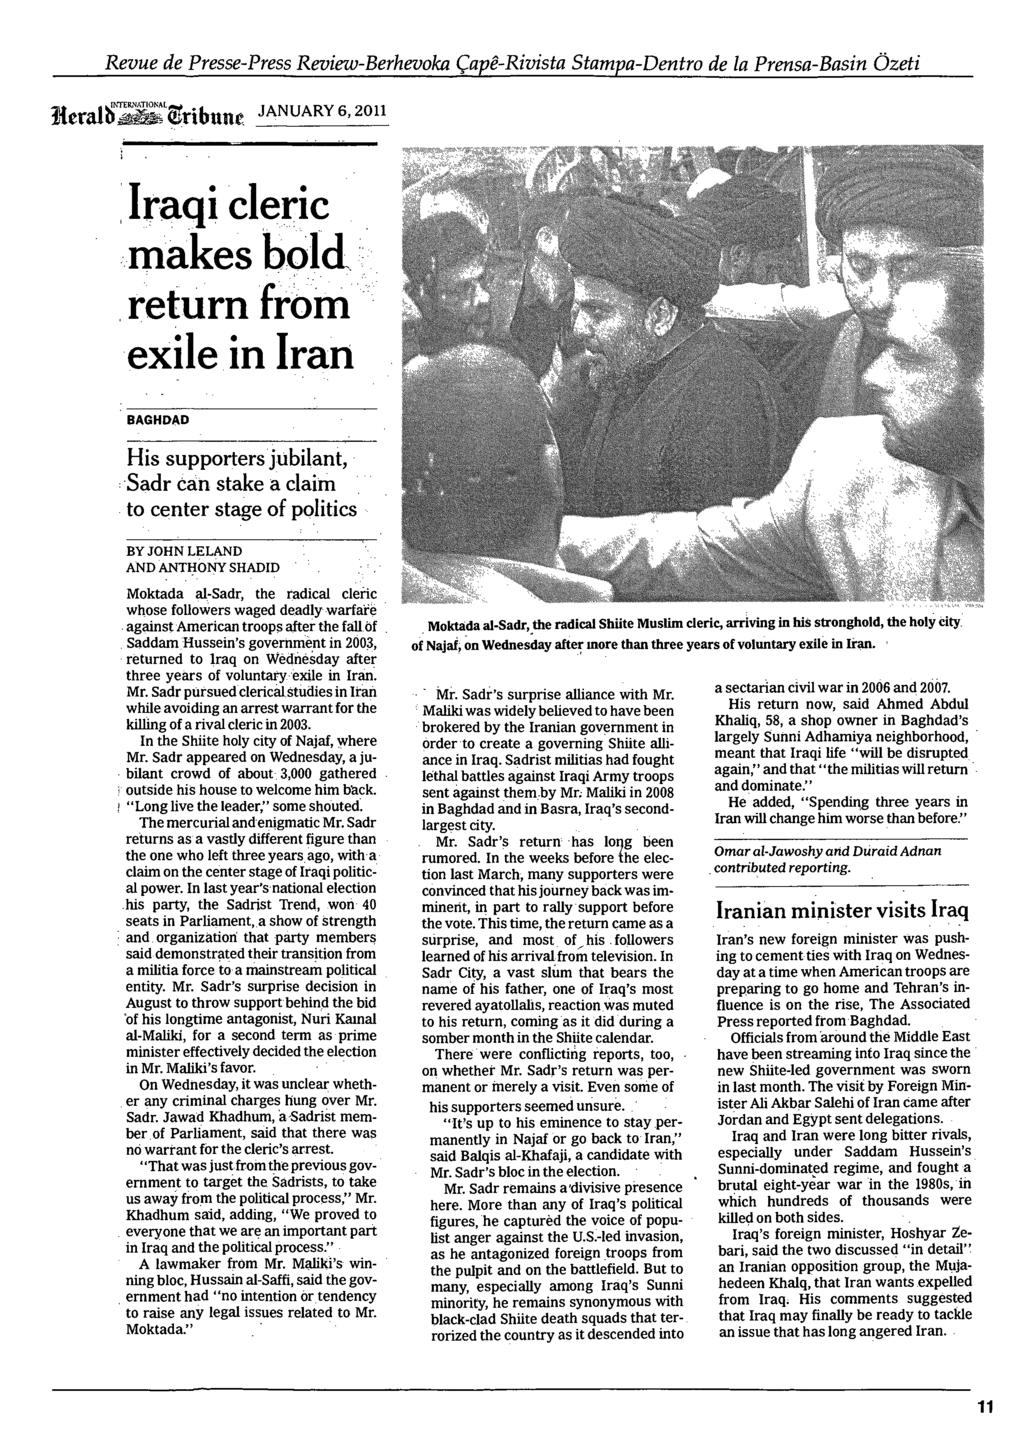 HeralSKSribmu January 6, 2011 Iraqi cleric makes bold return from exile in Iran BAGHDAD His supporters jubilant, Sadr can stake a claim to center stage of politics BYJOHNLELAND AND ANTHONY SHADID